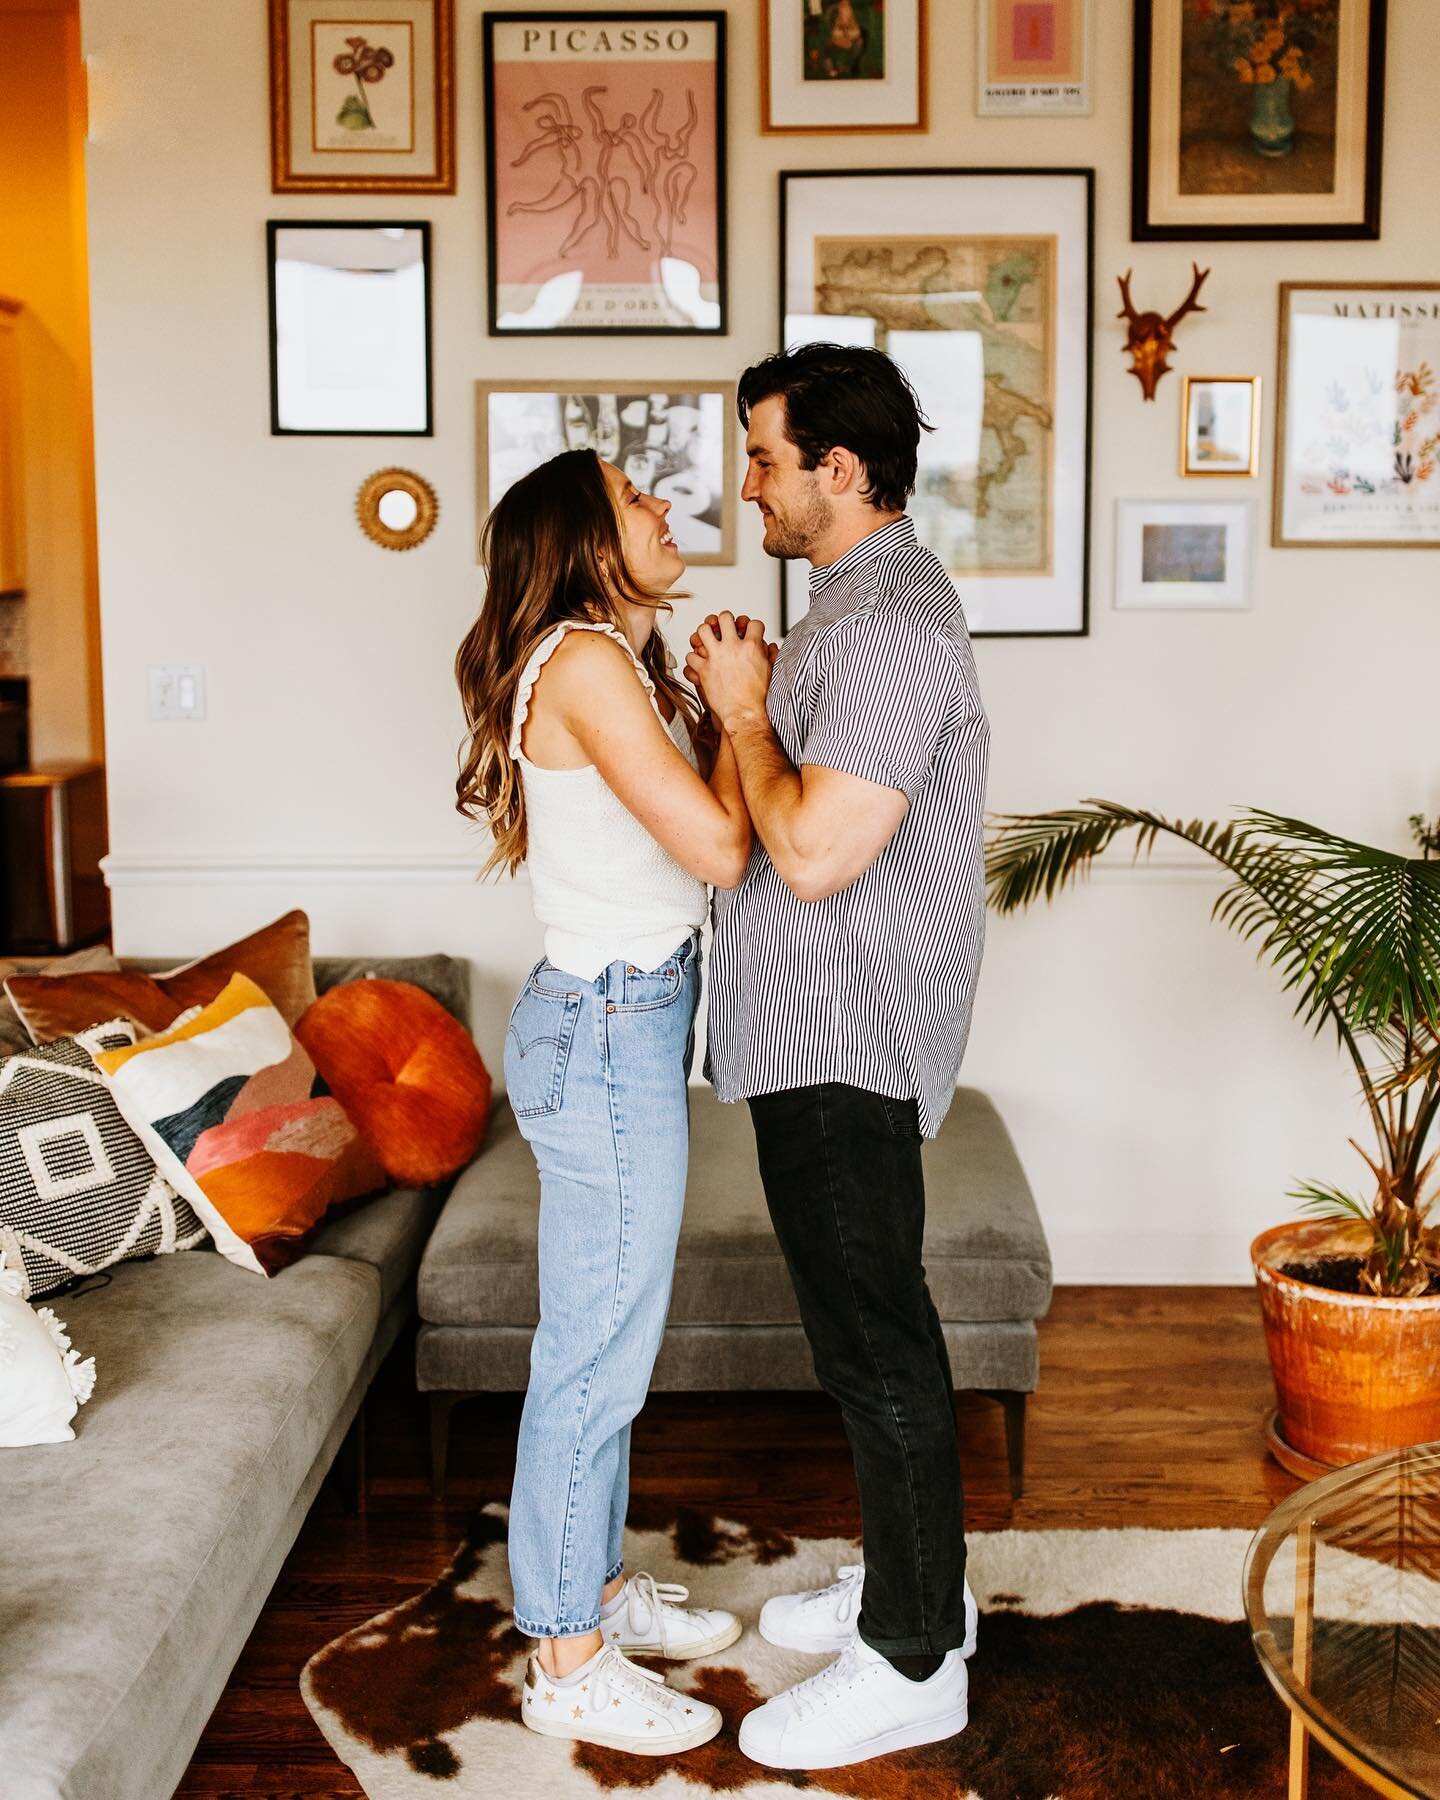 10/10 recommend starting your engagement session as an in home session ✨